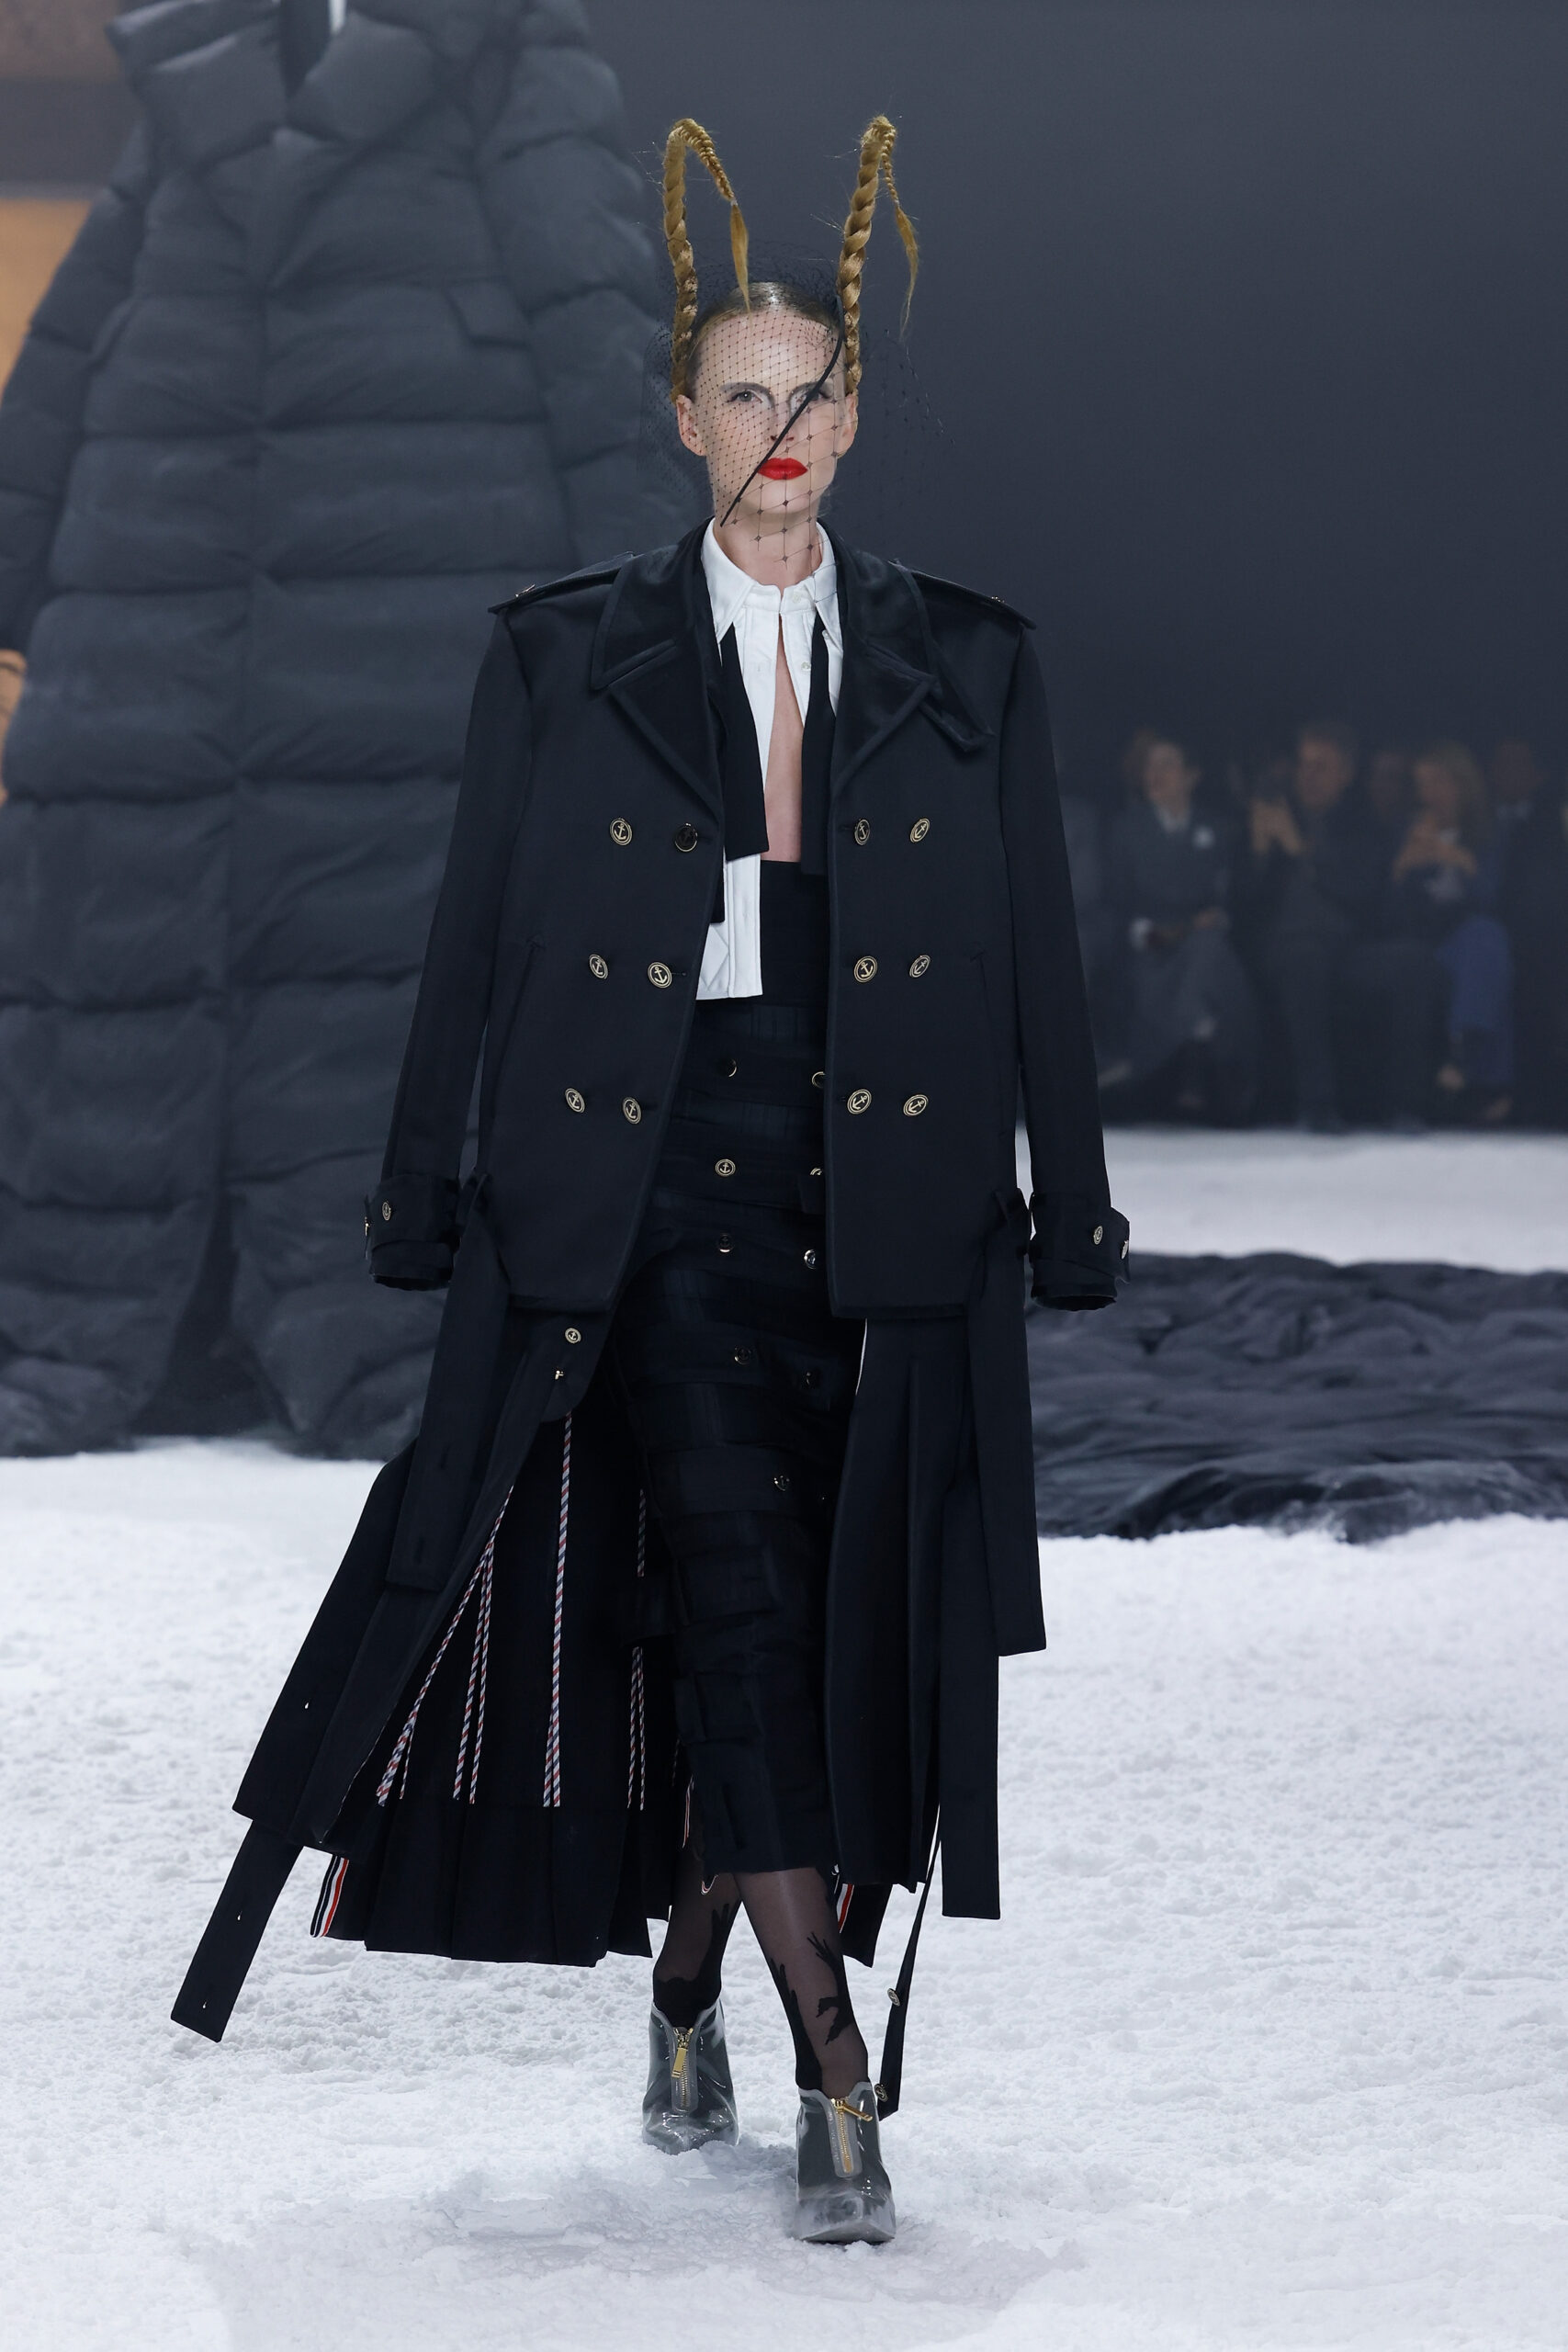 With a flair for drama (and a bit of romance) Thom Browne closes out New York Fashion Week with an epic return